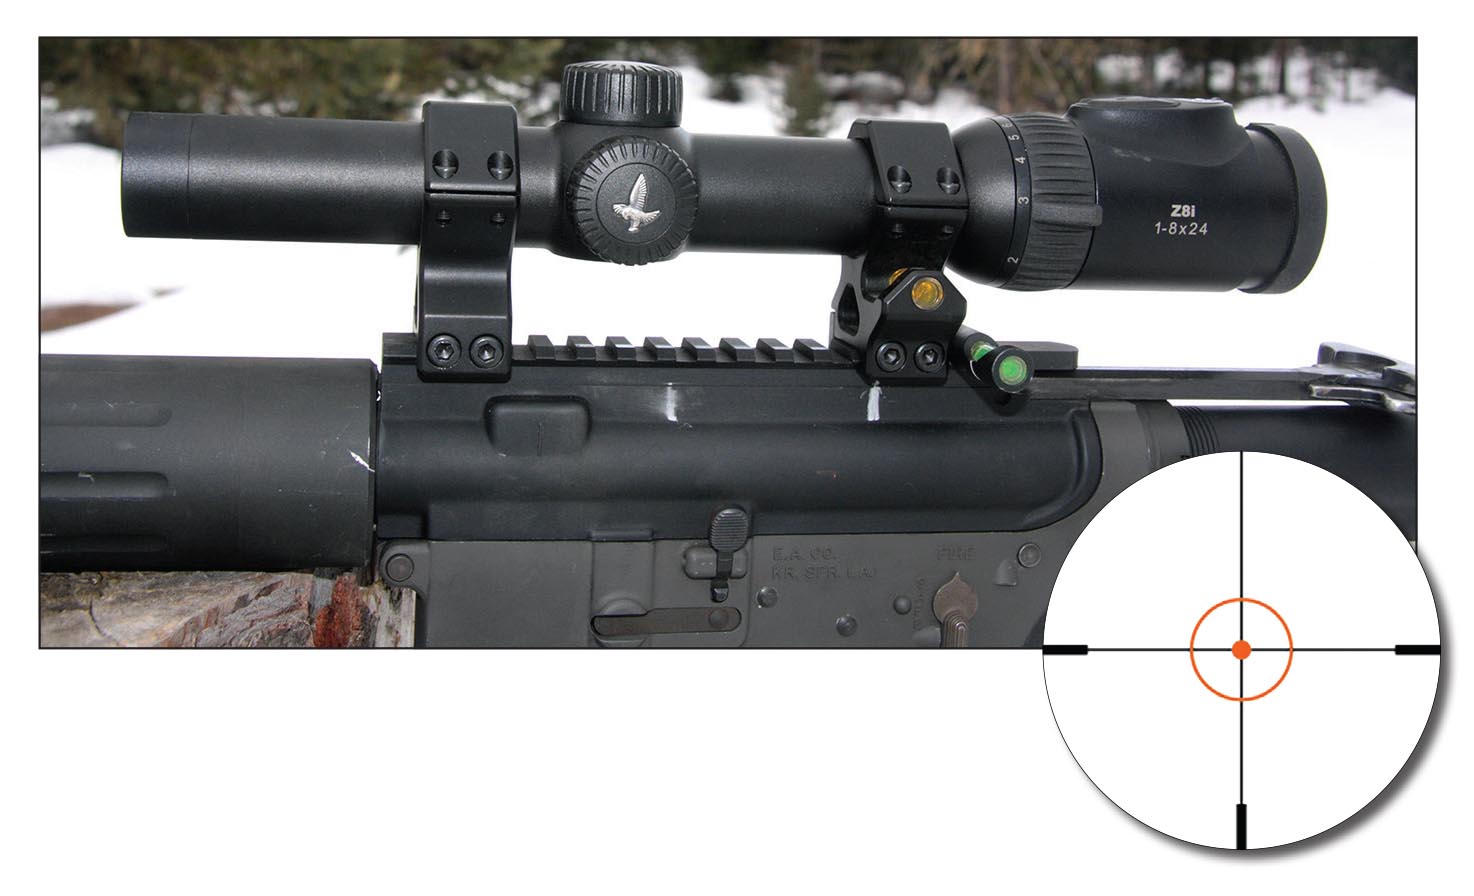 Precision Hardcore Gear Black Ops 30mm rings were used to mount Swarovski’s Z8i scope on this custom AR-15.